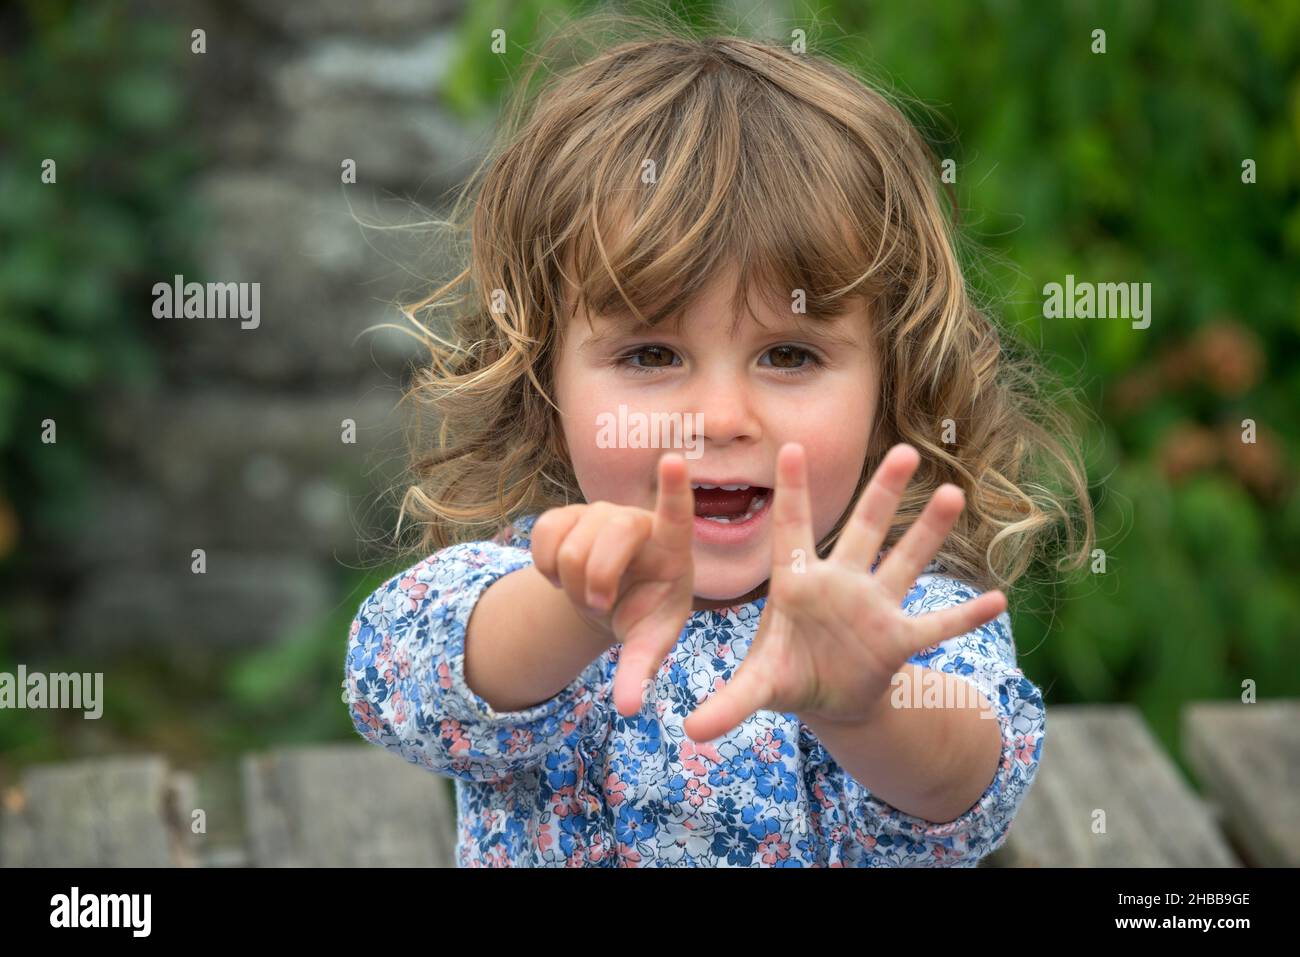 Two Year Old Girl, blonde, outdoors, counting on her fingers Stock Photo